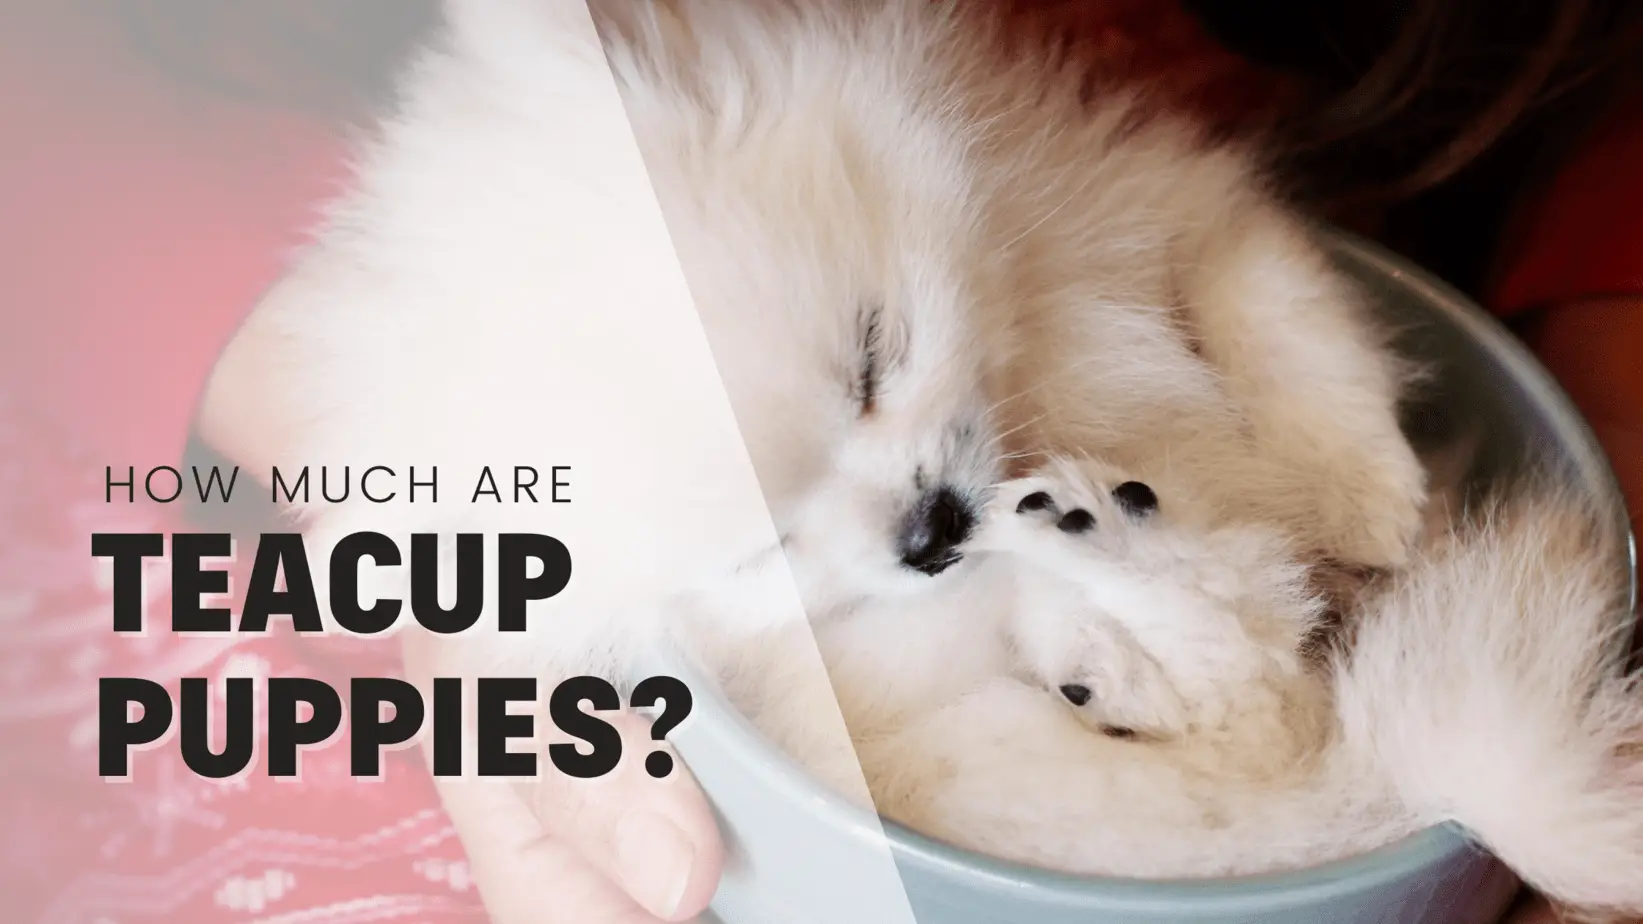 How Much are Teacup Puppies? And How To Ethically Find One